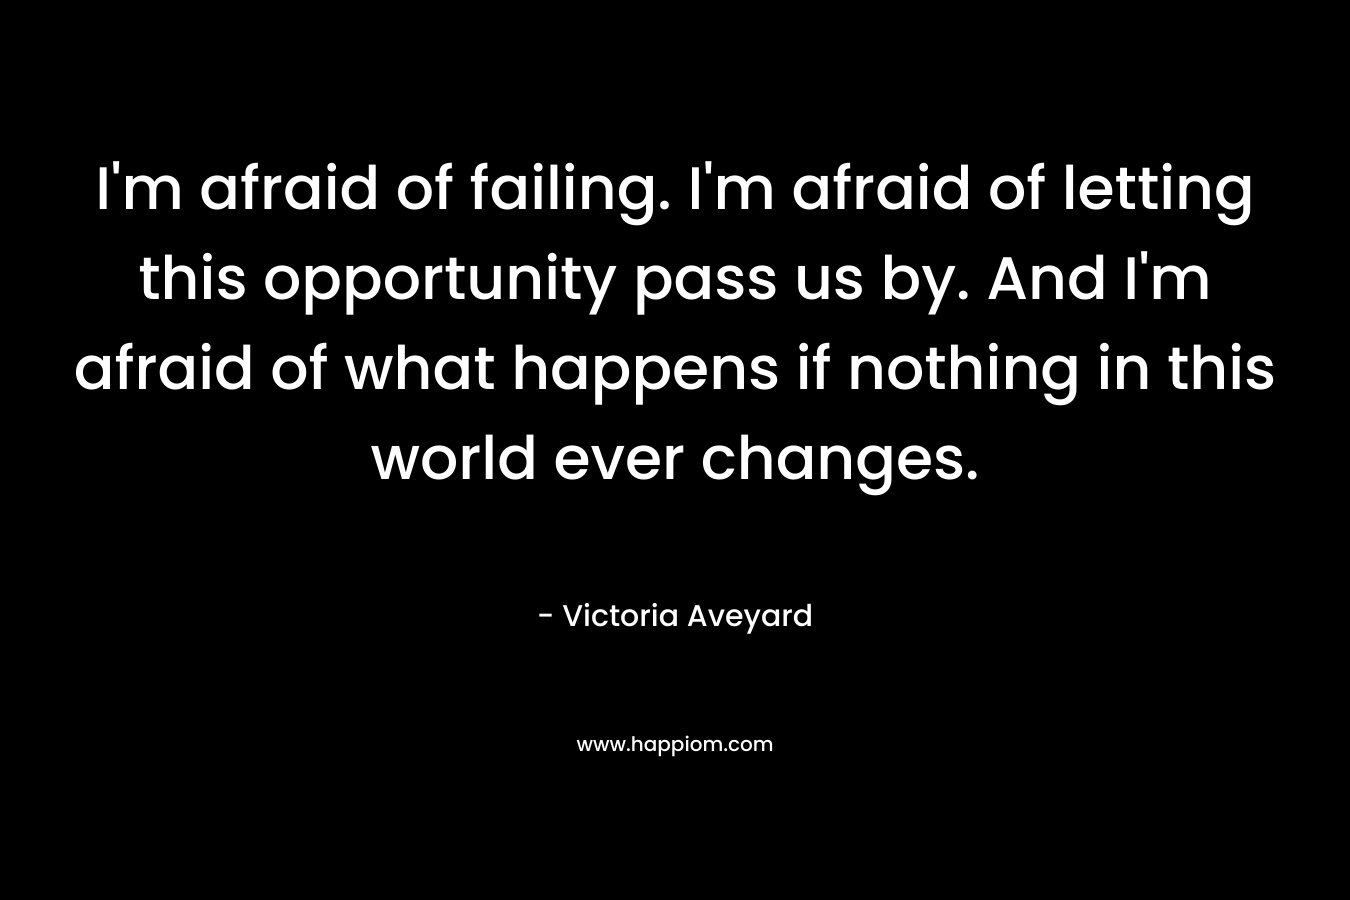 I'm afraid of failing. I'm afraid of letting this opportunity pass us by. And I'm afraid of what happens if nothing in this world ever changes.